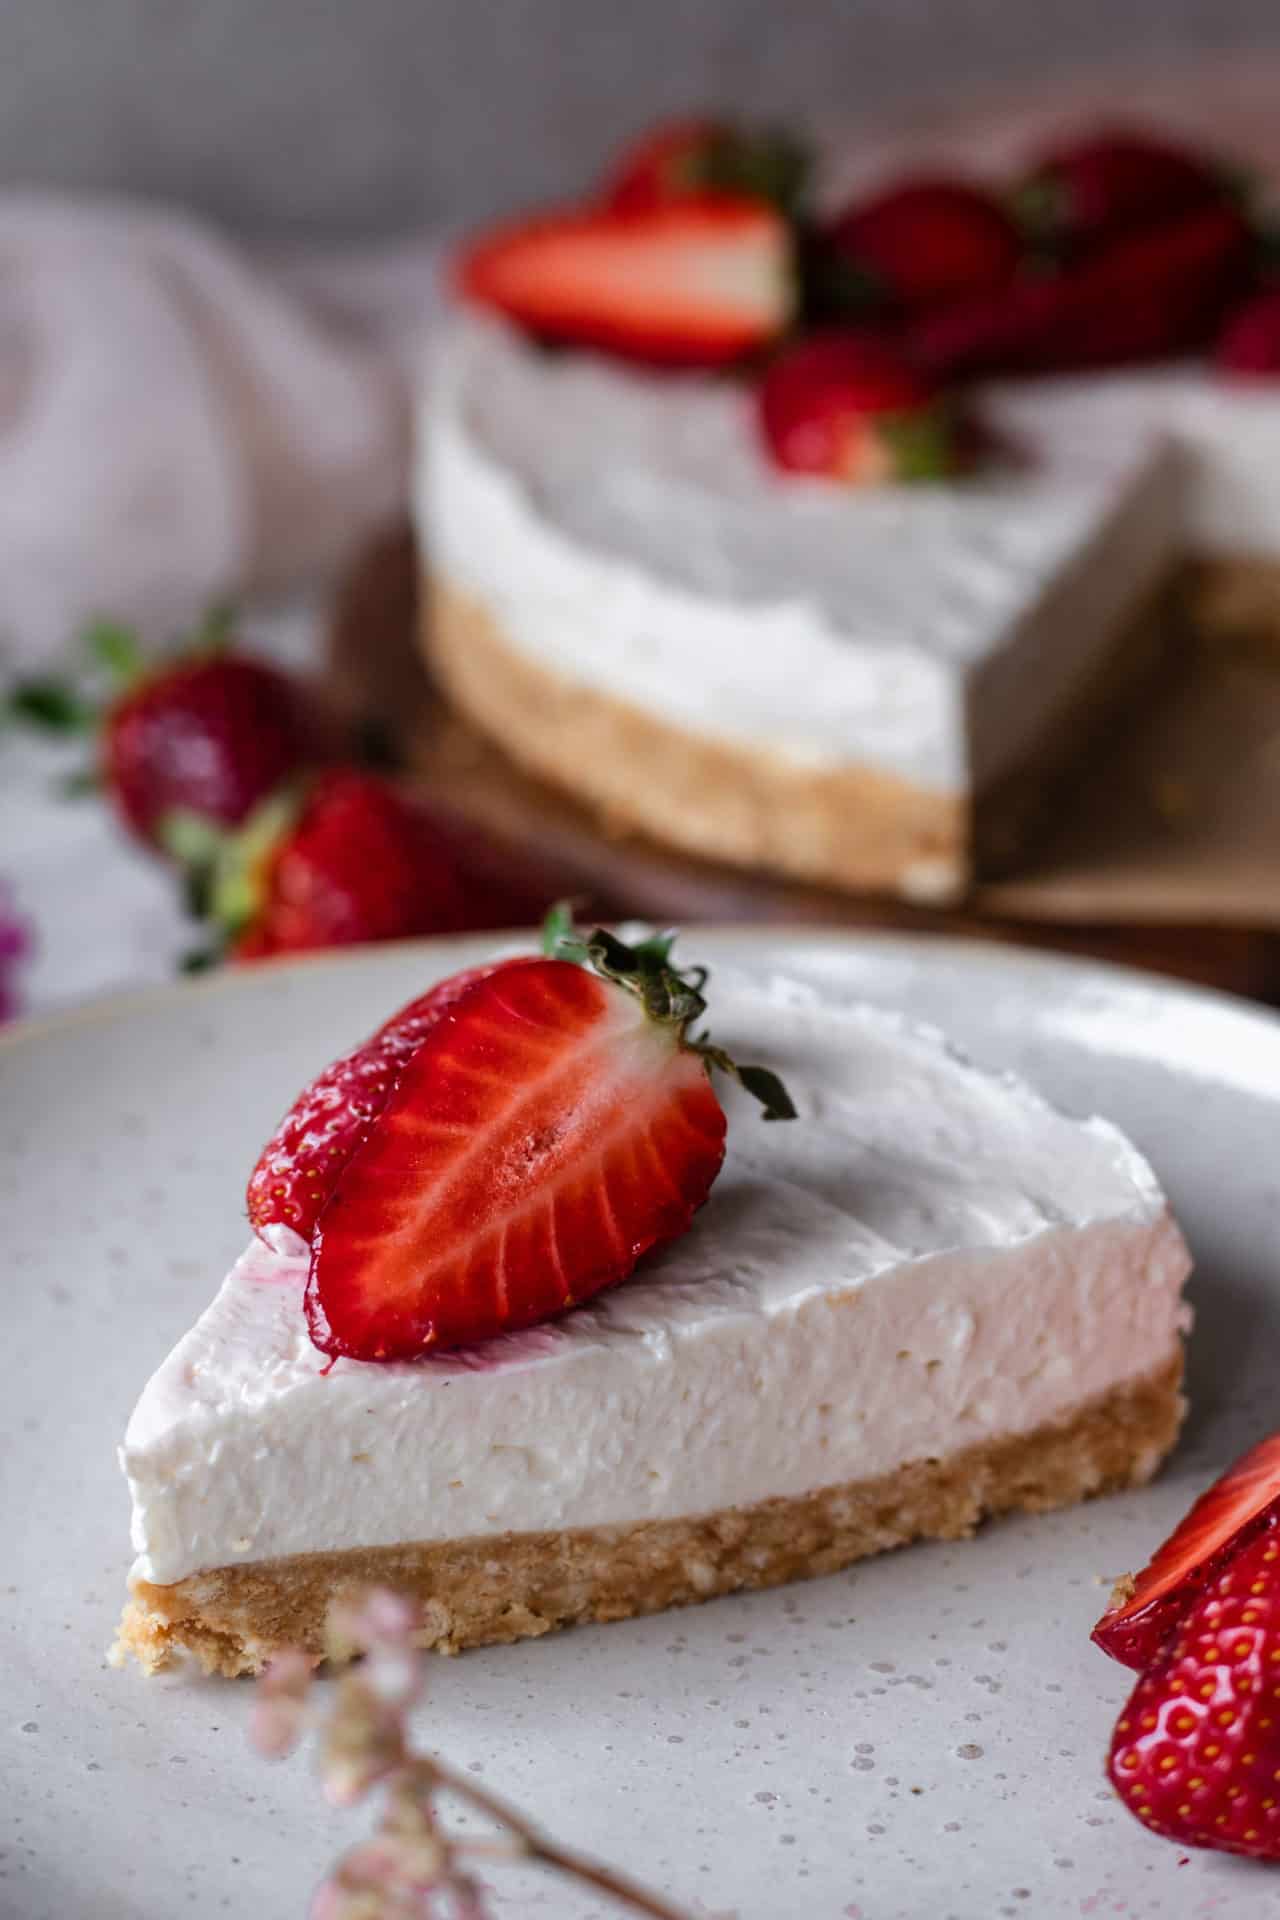 This Gluten-Free No-Bake Cheesecake takes only 20min to make and is refreshing, creamy, tangy, and perfectly sweetened.